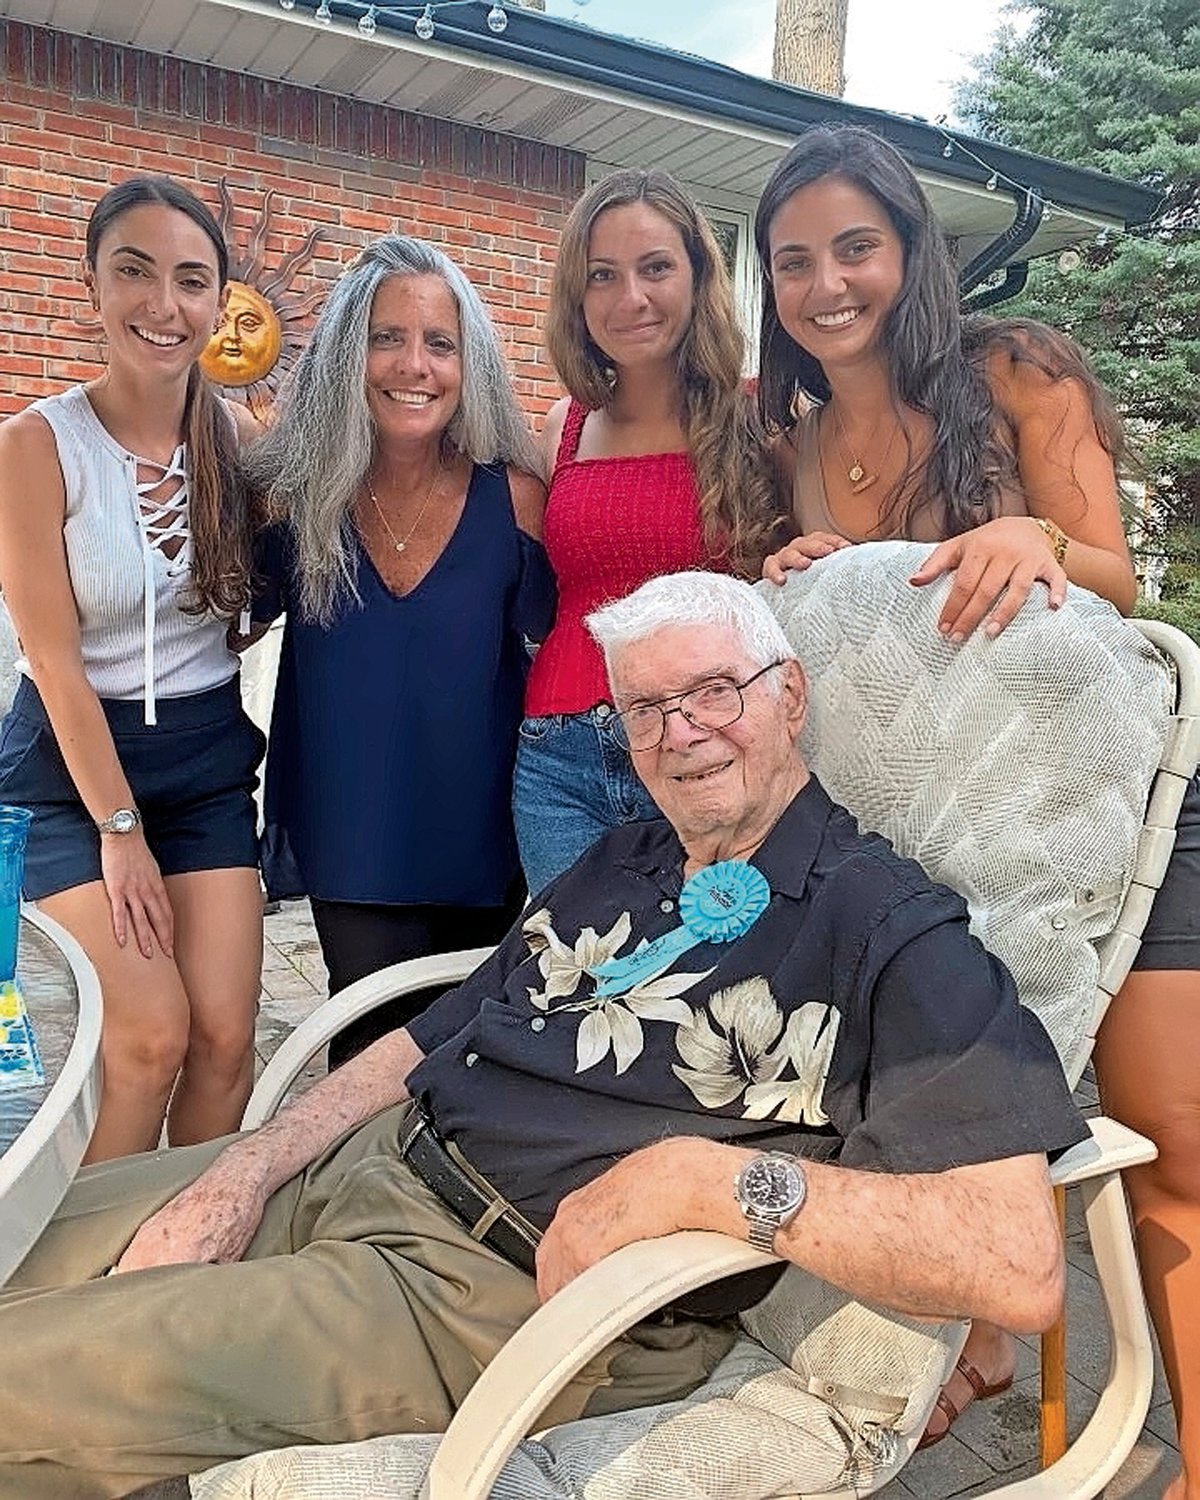 Thomas Nola, center, celebrated his 100th birthday after beating Covid-19 and a cardiac event in late 2021. His daughter Francine Castagna, second from left, and granddaughters, from left, Nicole, Gianna and Brianna surprised him with a party.